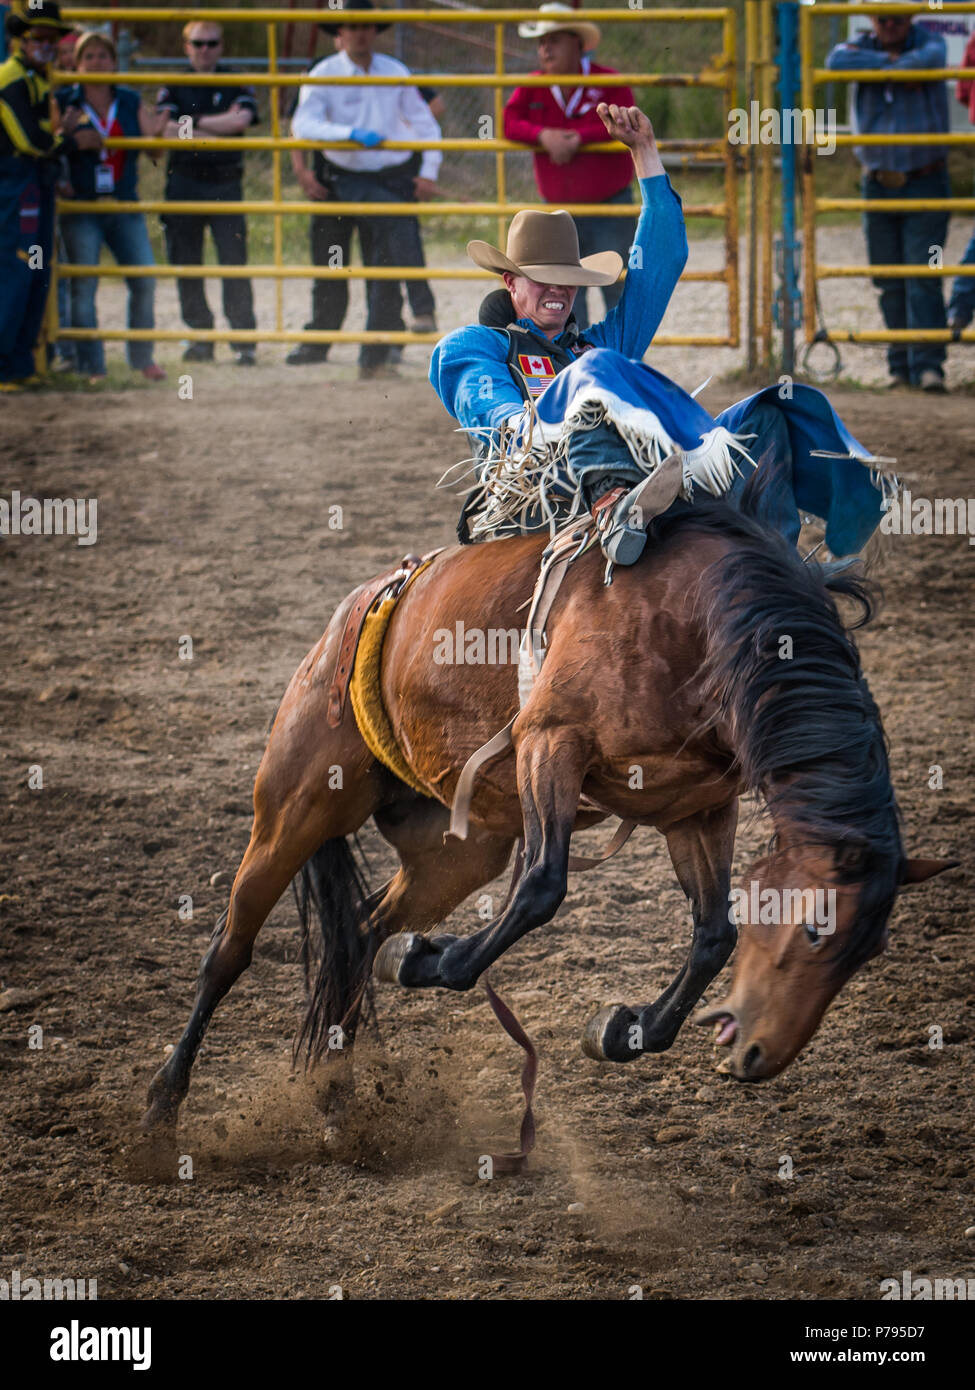 A cowboy rides a bucking bronco at the Airdrie Pro Rodeo during the bareback competition. Stock Photo